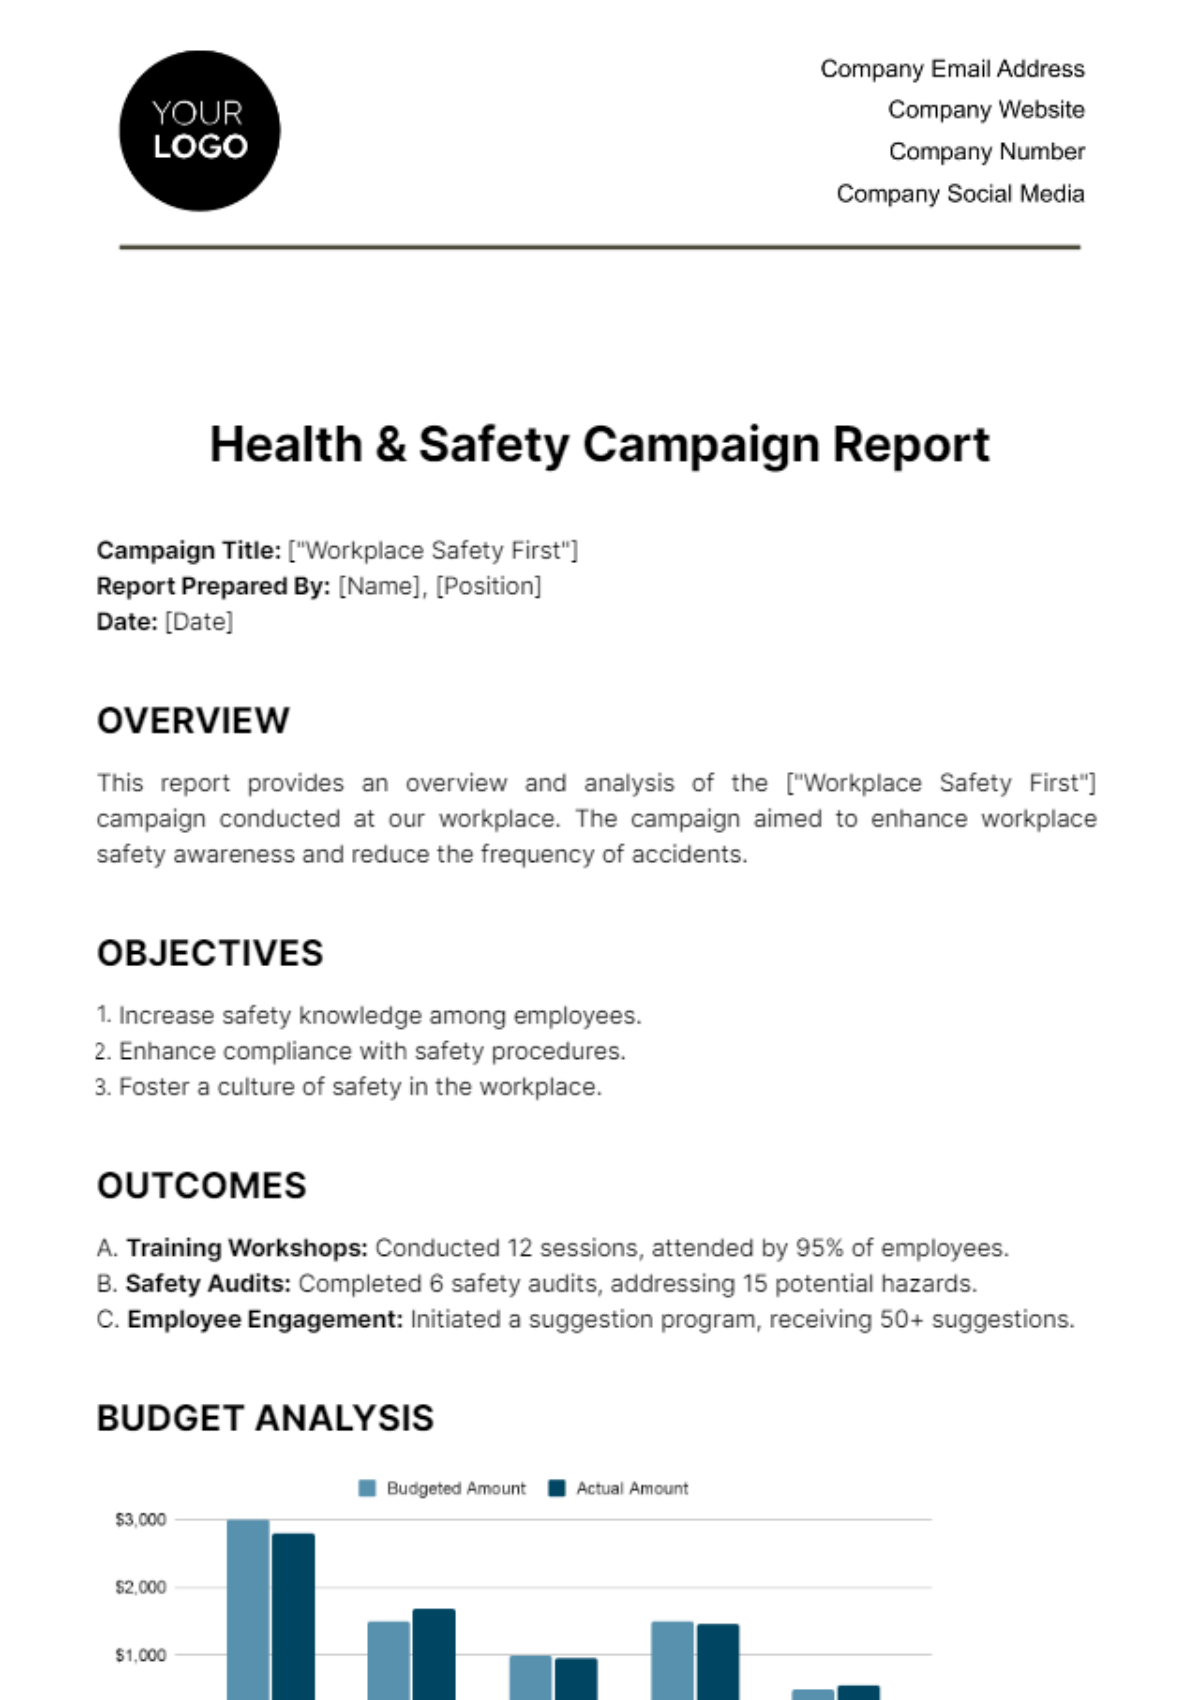 Health & Safety Campaign Report Template